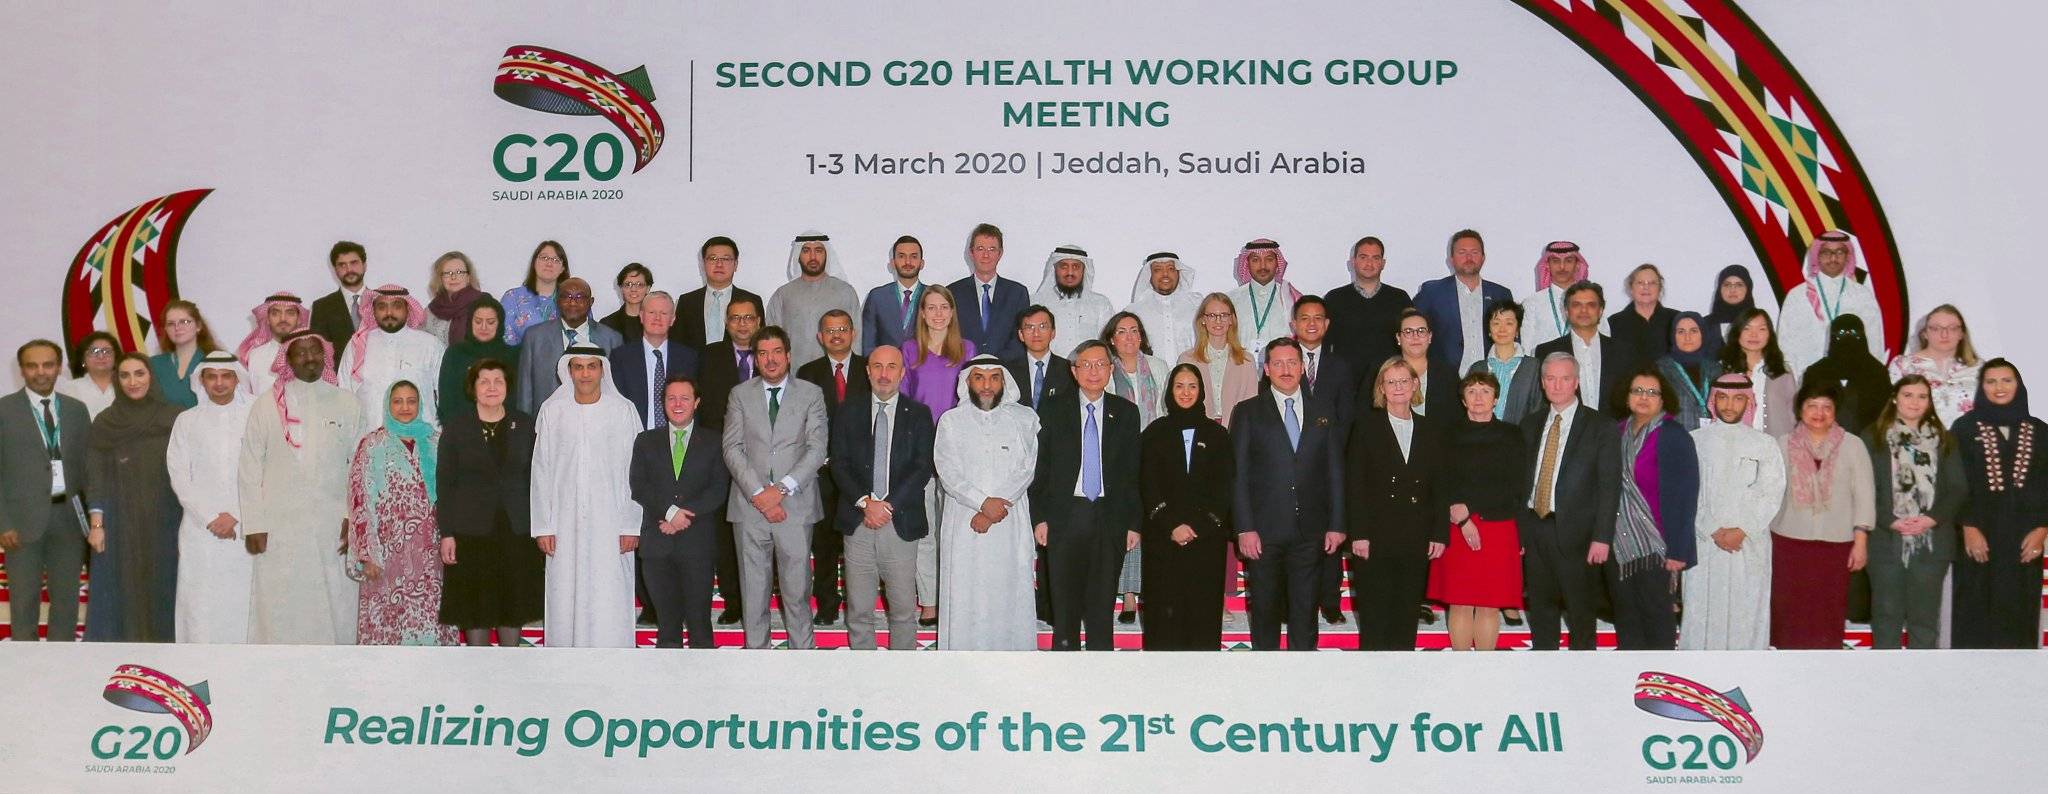 Delegates from the G20 Health Working Group (HWG) discussed ways the group of 20 major economies can work together to strengthen health systems and enhance global health security. — Courtesy photo